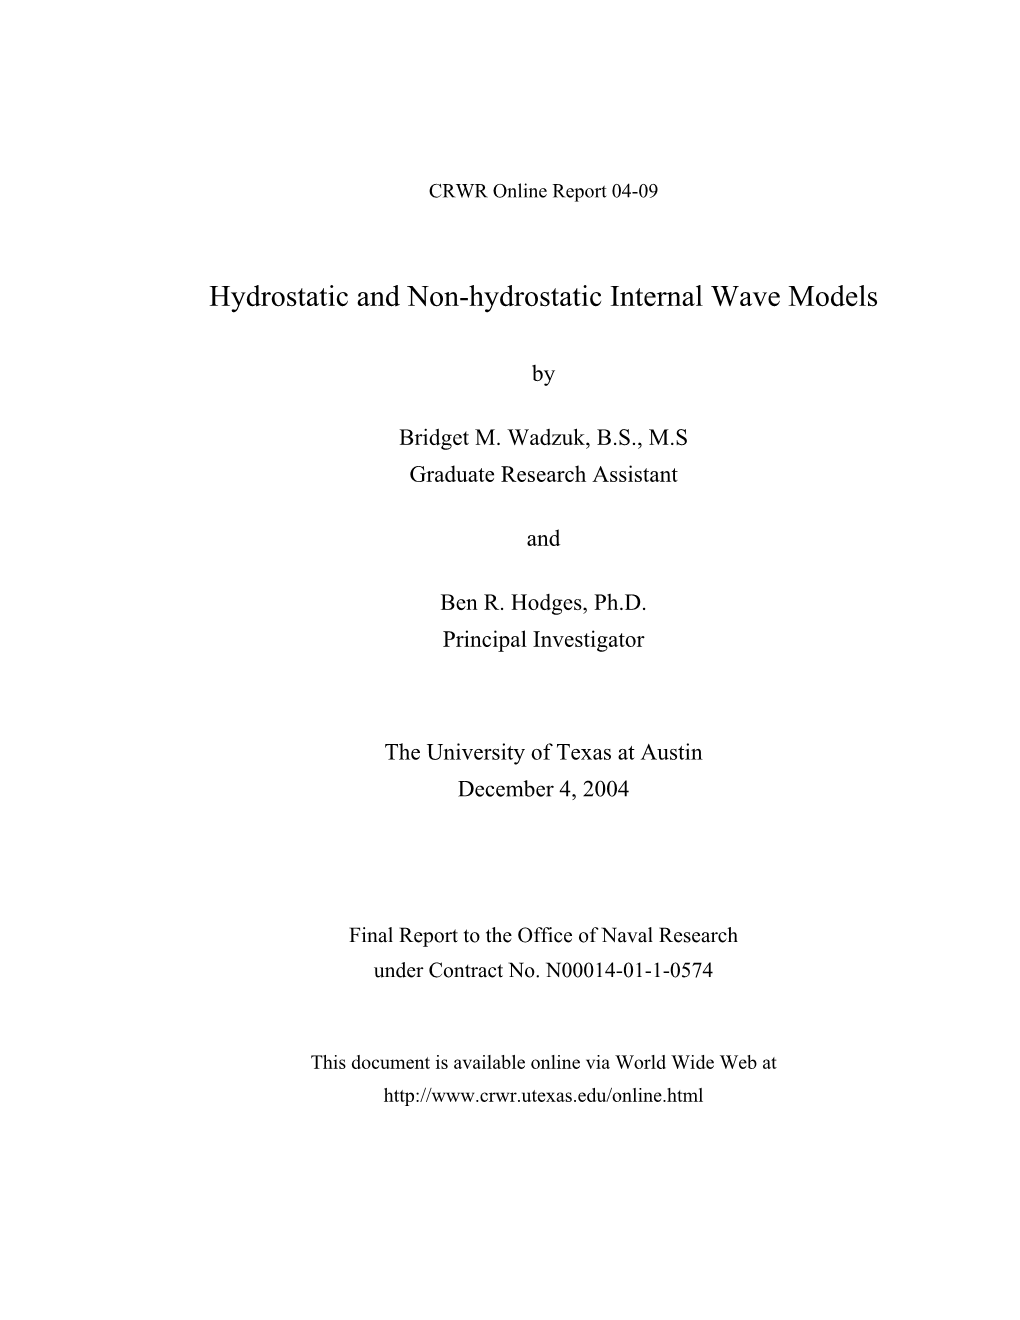 Hydrostatic and Non-Hydrostatic Internal Wave Models